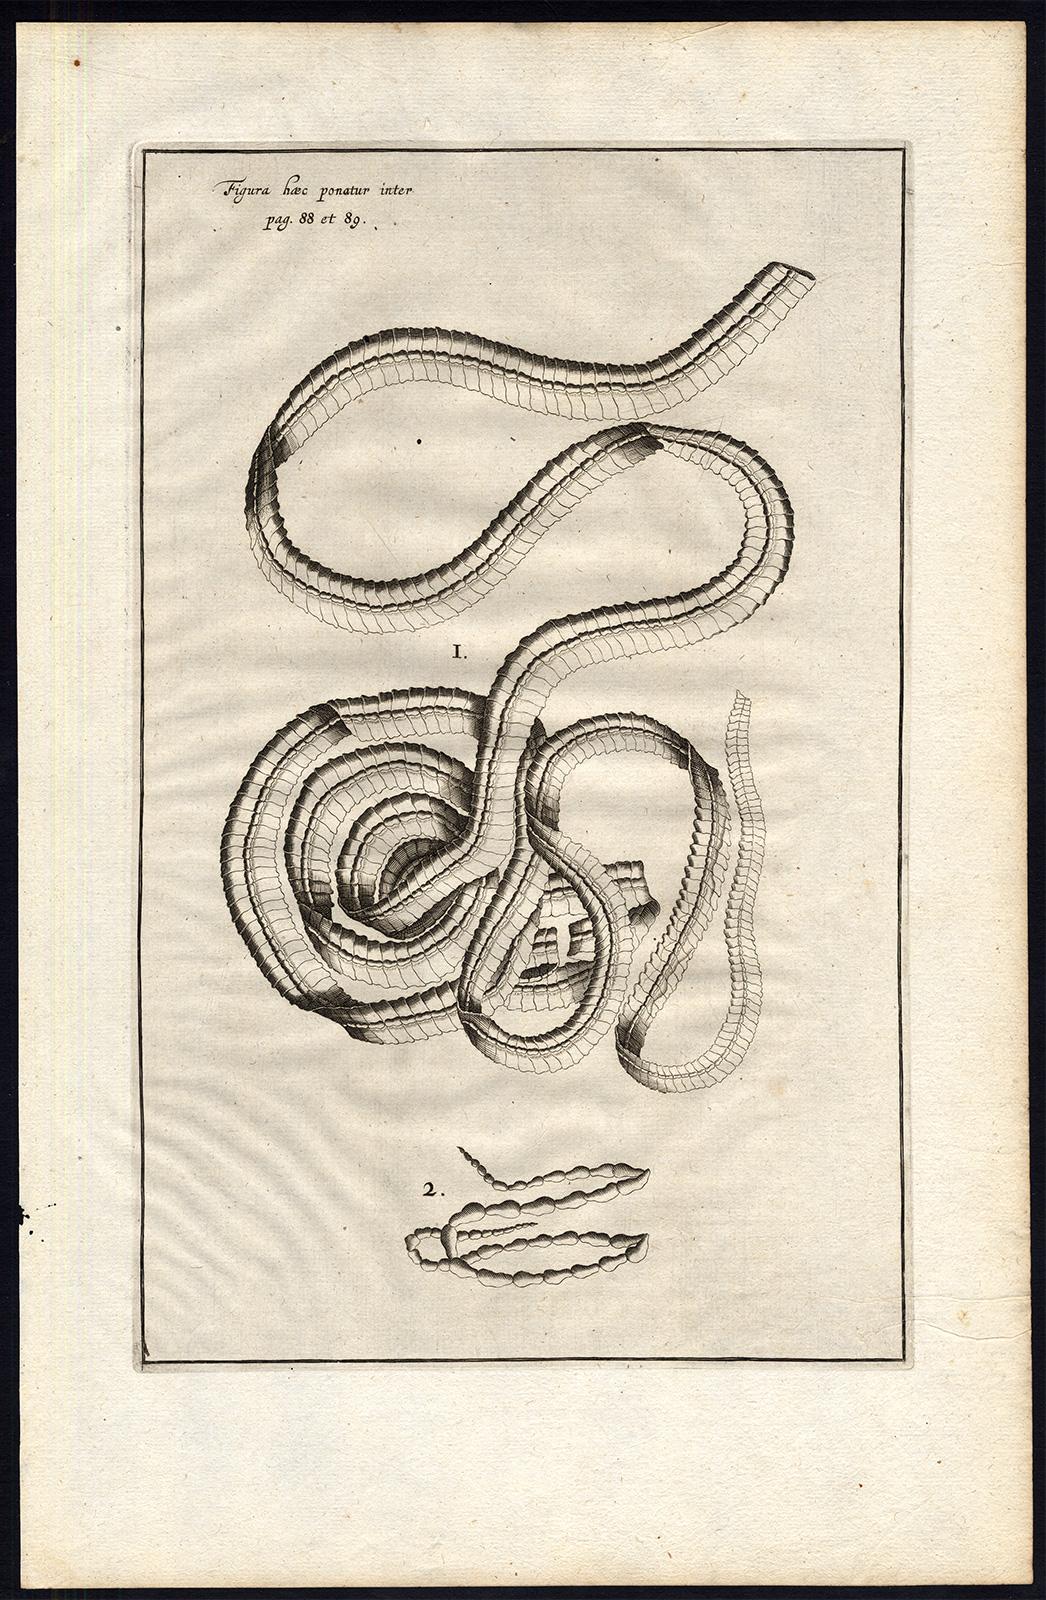 2 Anatomical prints - tapeworms - by Spigelius - Engraving - 17th c - Print by Adrianus Spigelius